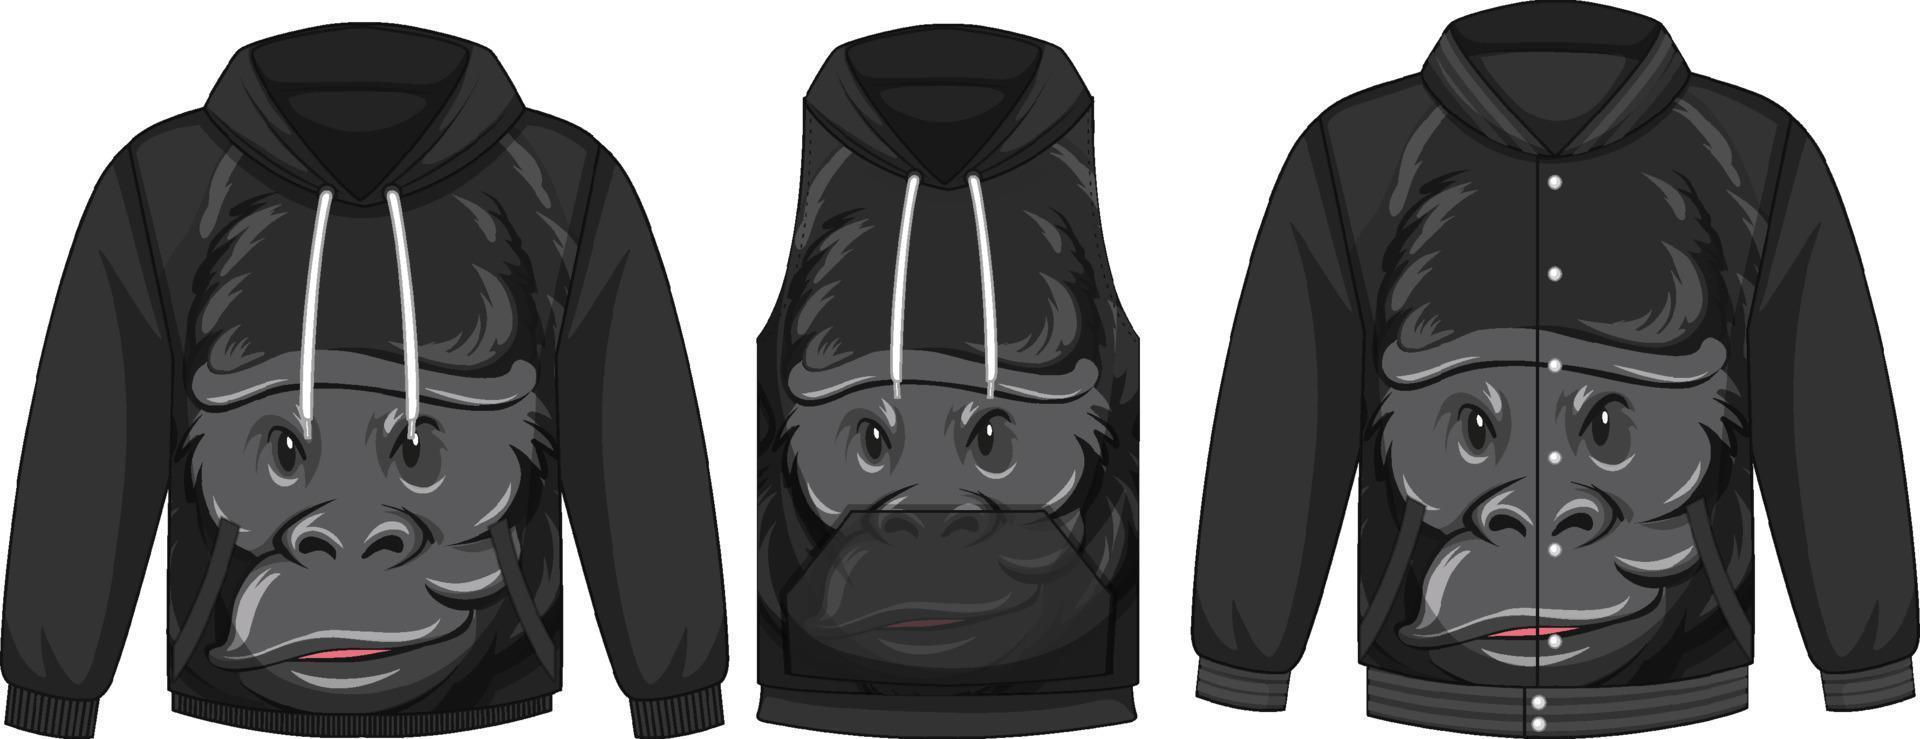 Set of different jackets with gorilla template vector